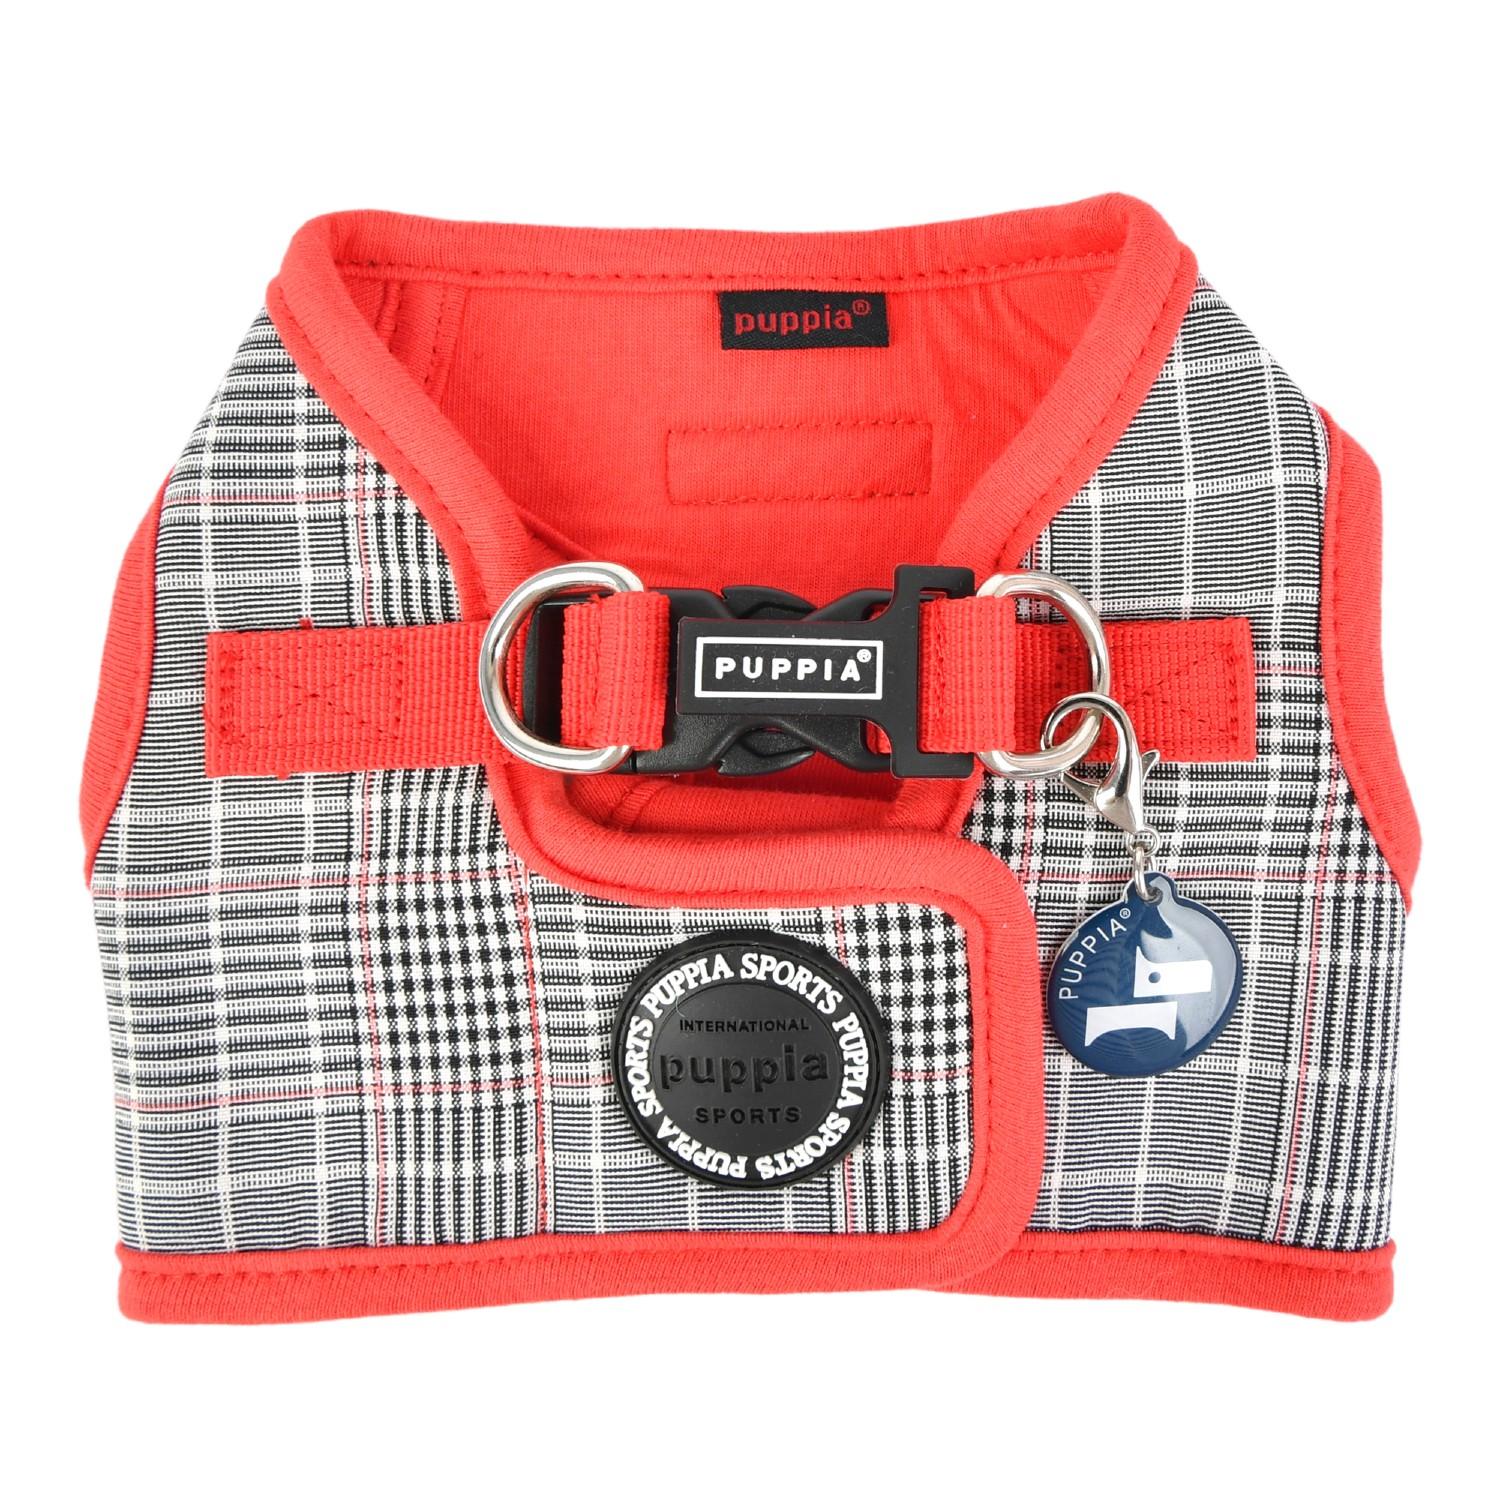 Blake Vest Dog Harness by Puppia - Red